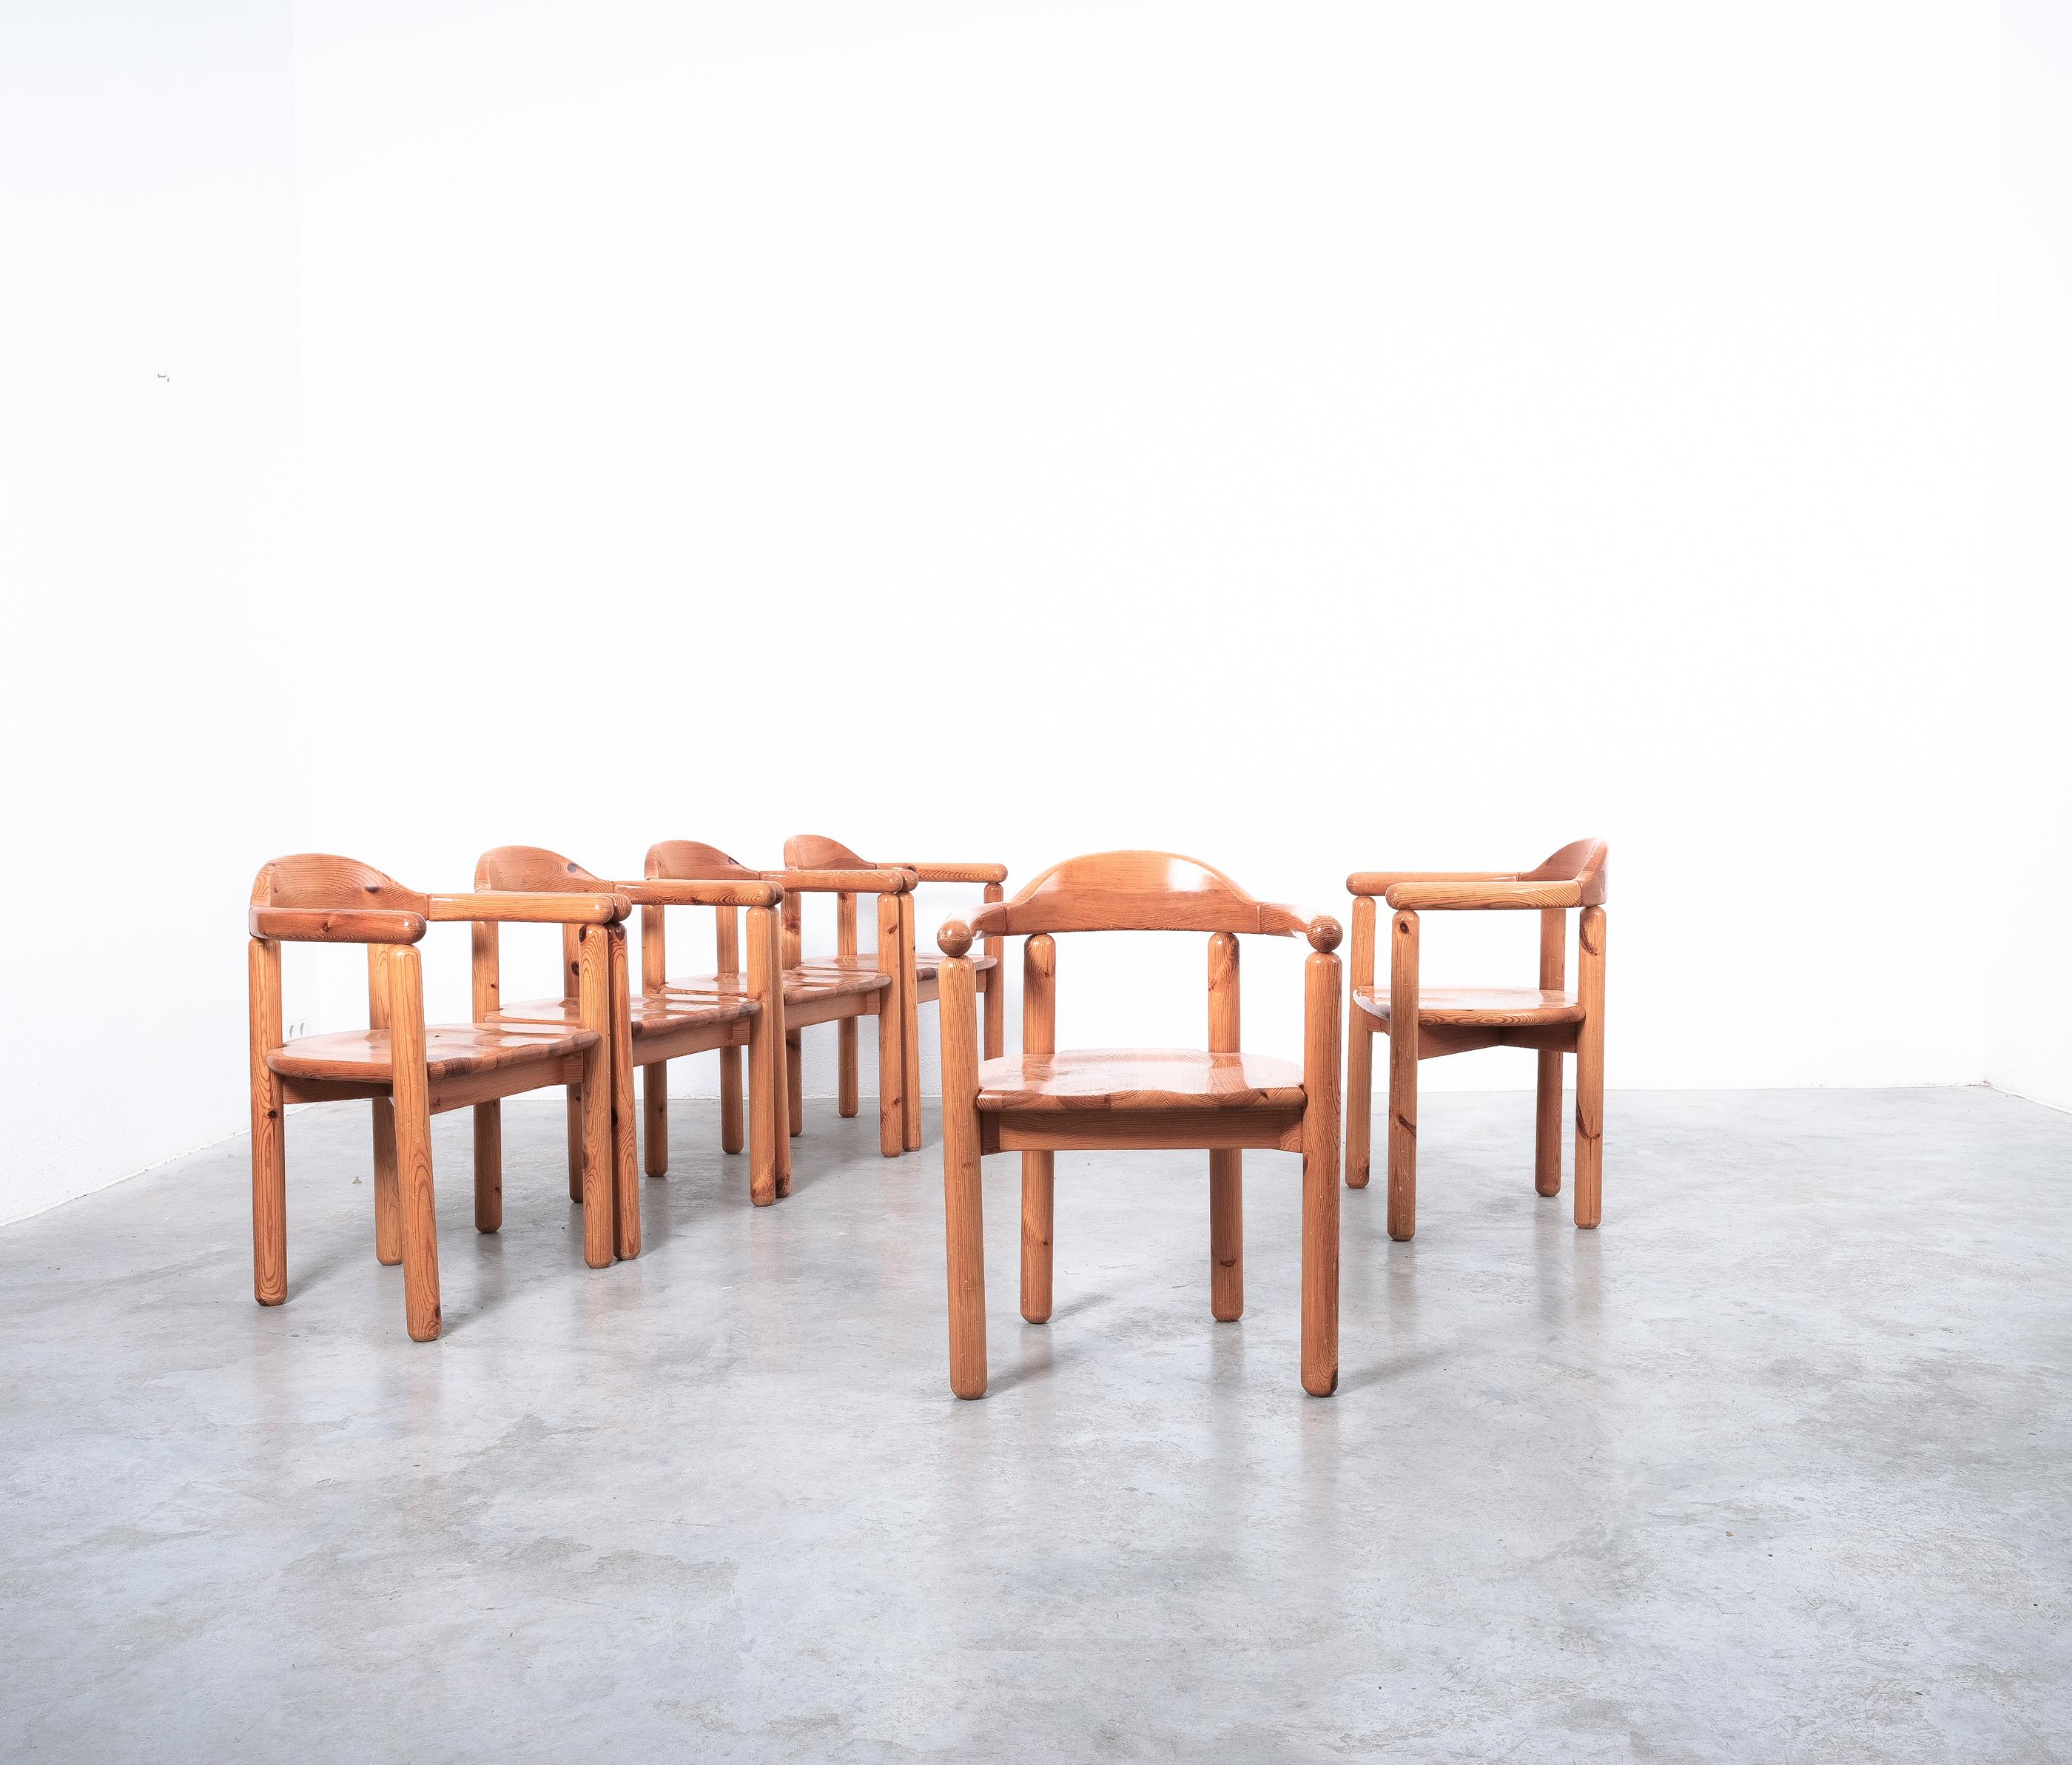 Rainer Daumiller Solid Pine Wood Dining Chairs '6' Danish Design, 1970 For Sale 6